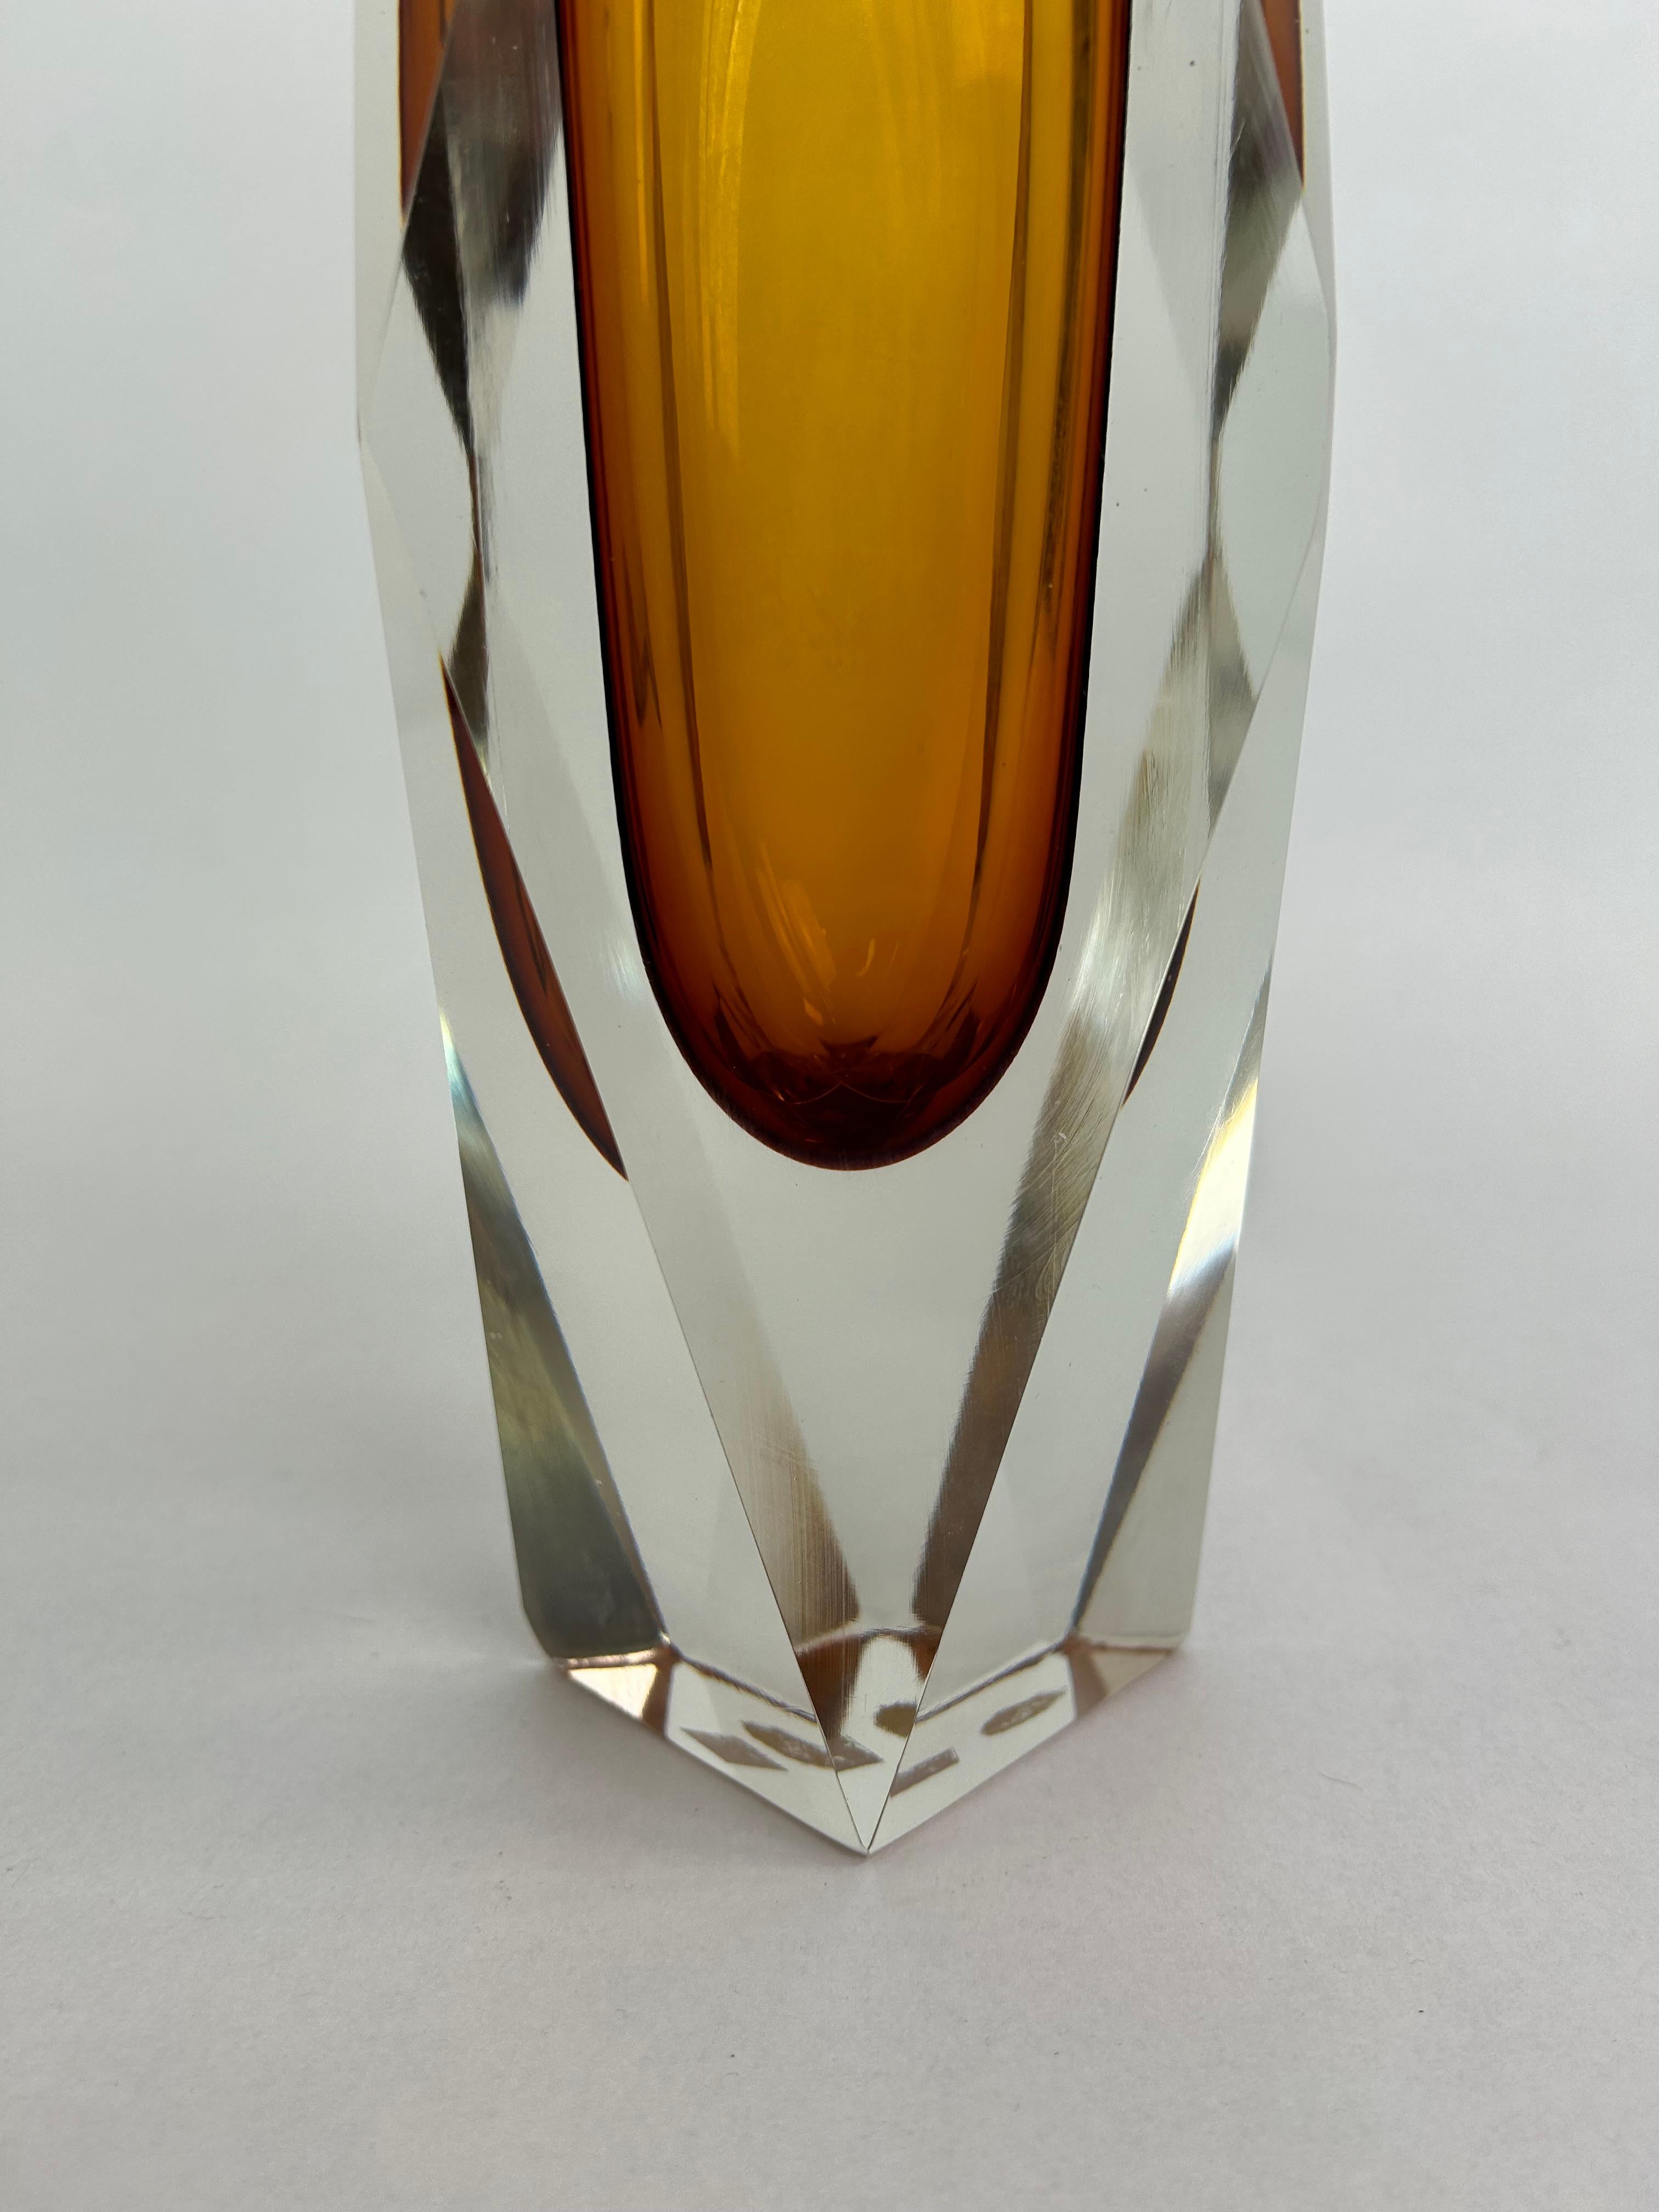 Yellow art glass vase by Flavio Poli for Murano In Good Condition For Sale In Banská Štiavnica, SK